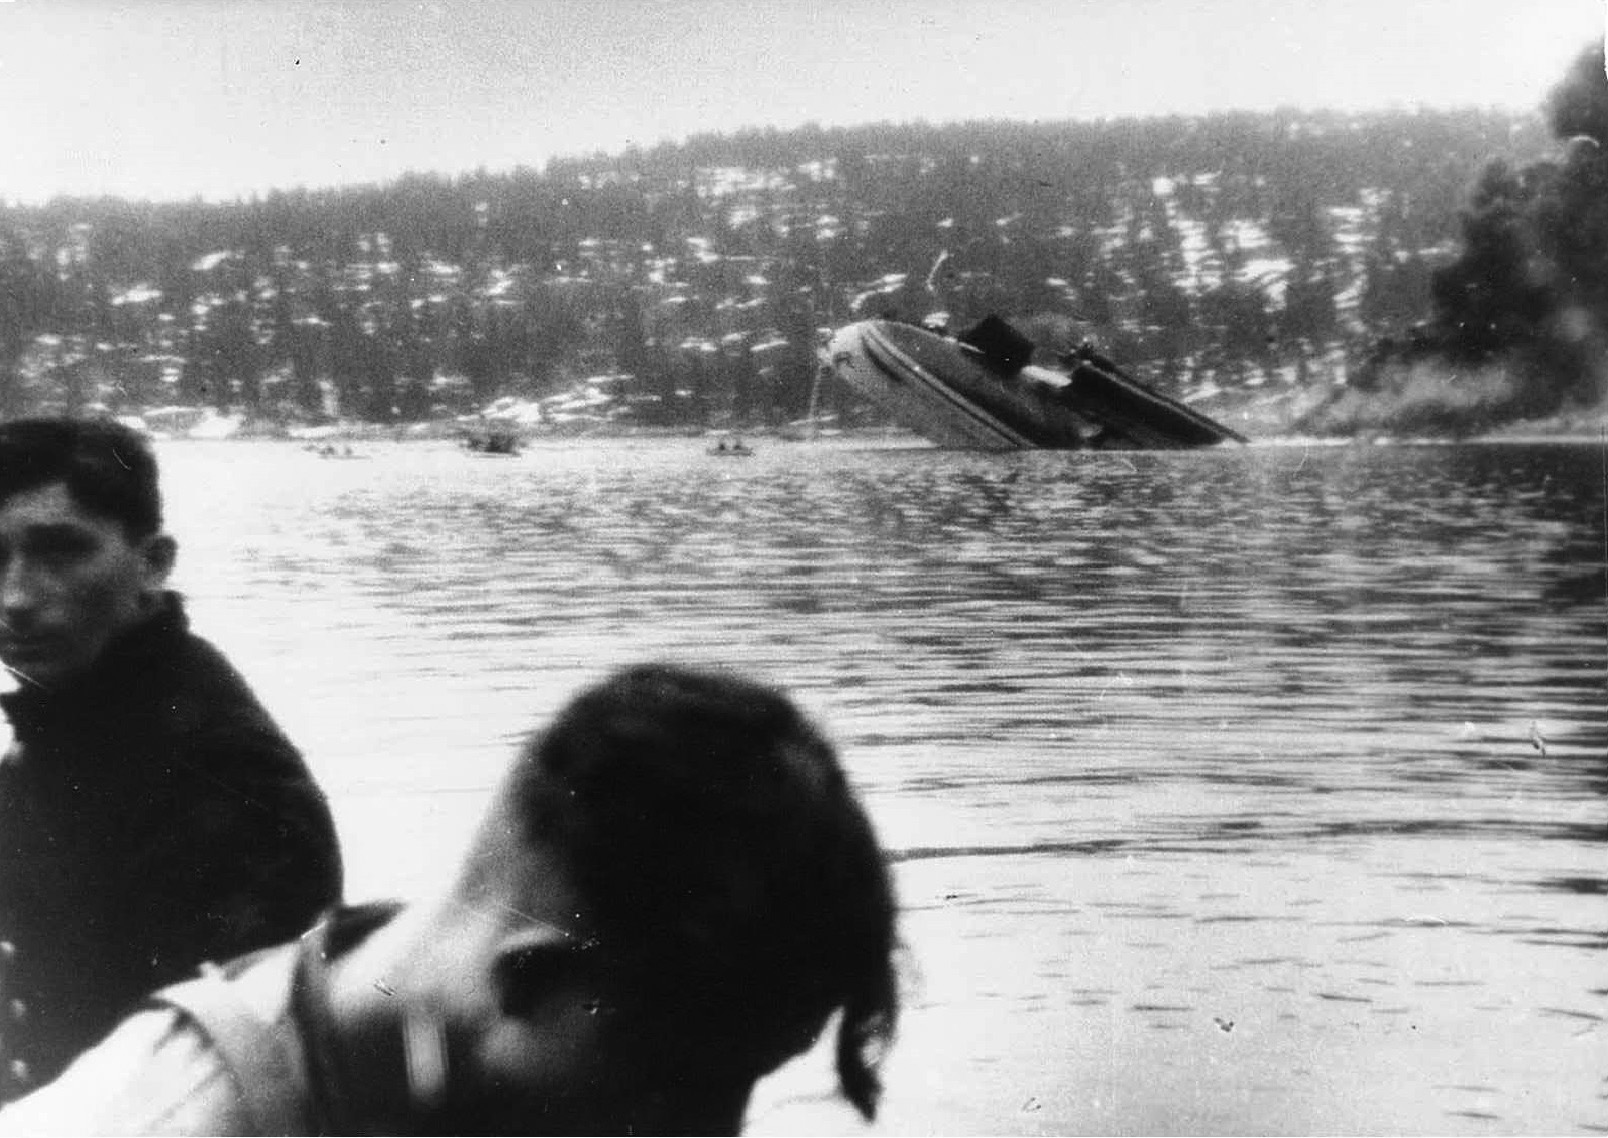 The stern of the Blücher remains above the water’s surface momentarily as the ship begins its final plunge. The sinking of Blücher was an embarrassment for the Kriegsmarine.